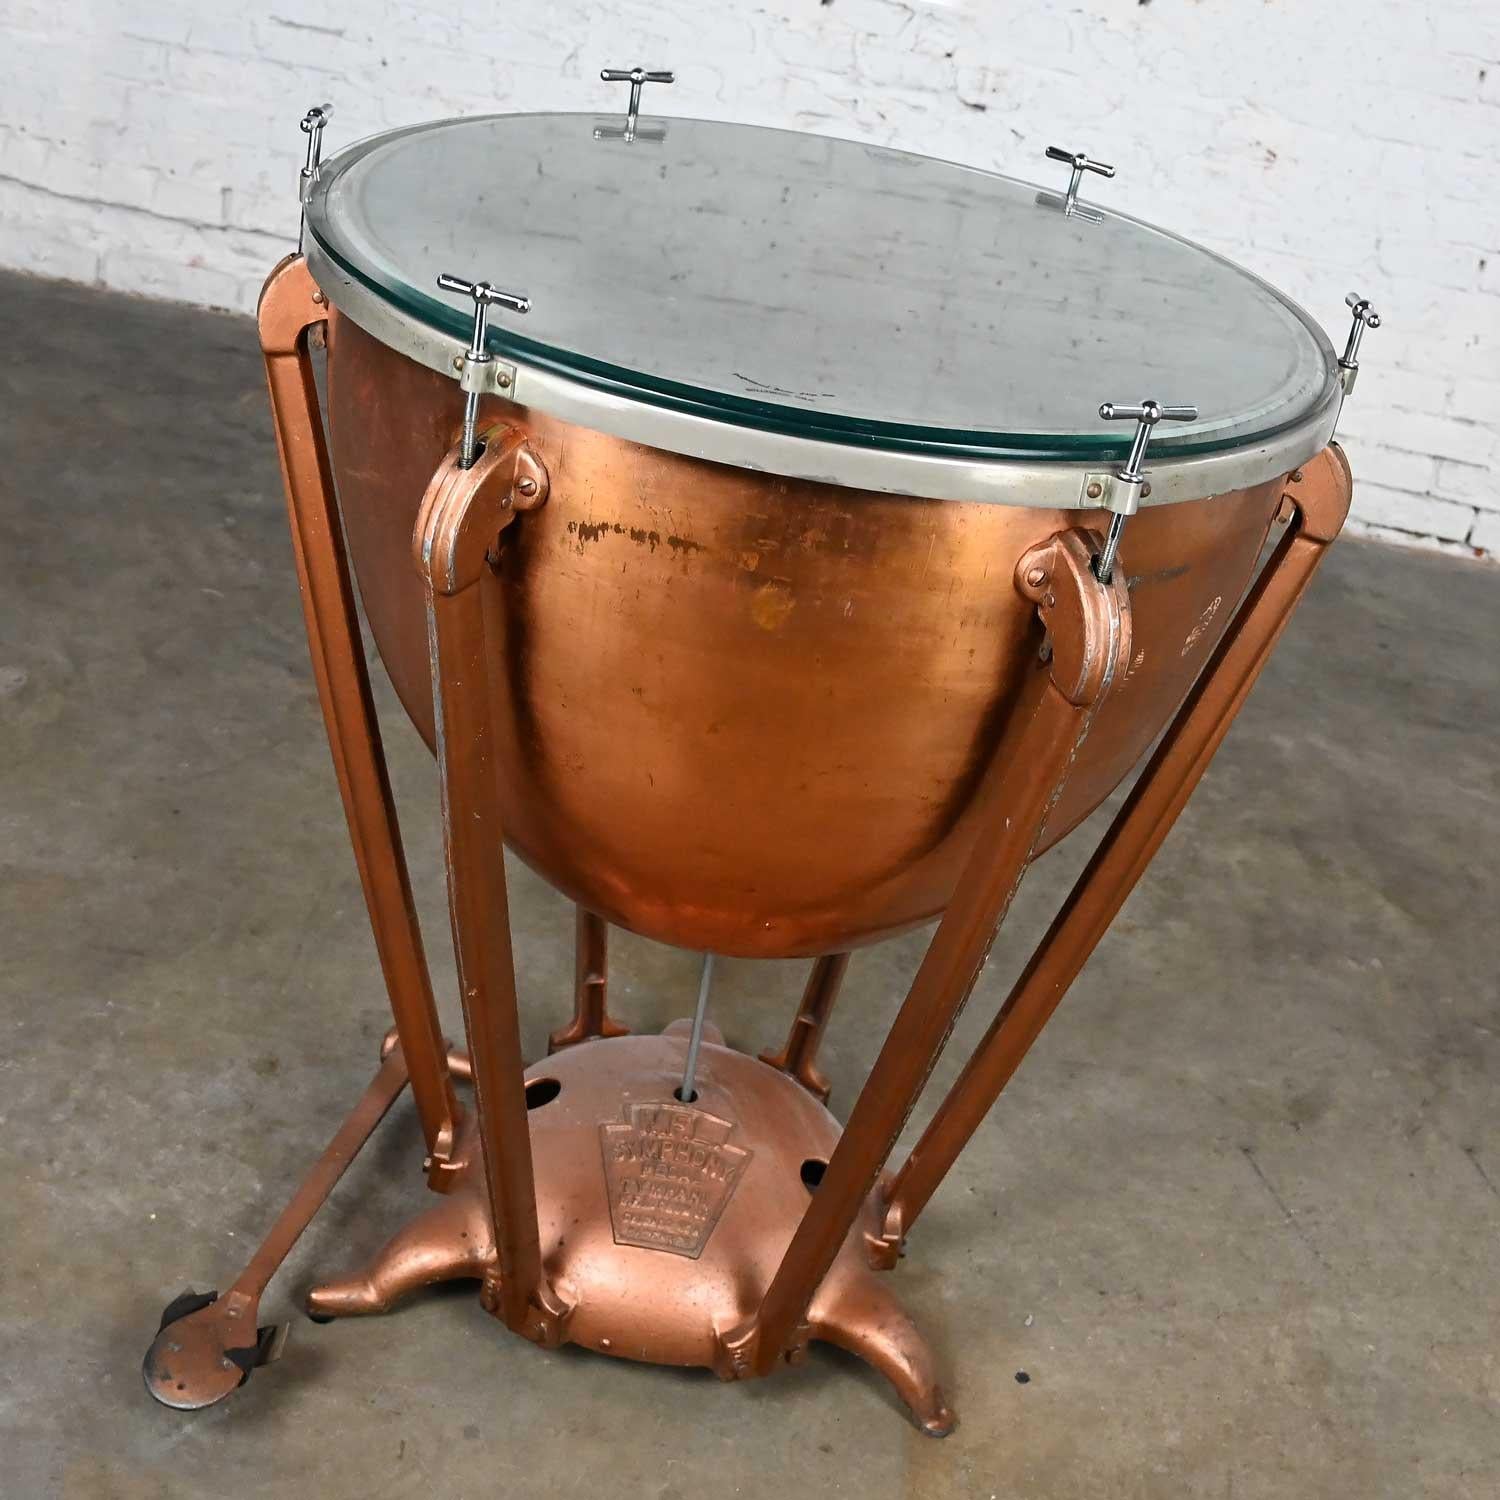 Awesome vintage steampunk Industrial or rustic copper kettle drum center table by W.F.L. Drum Company. Comprised of copper painted aluminum arms & base, copper kettle, drum skin top with painted steel rim, and chrome handles. Beautiful condition,